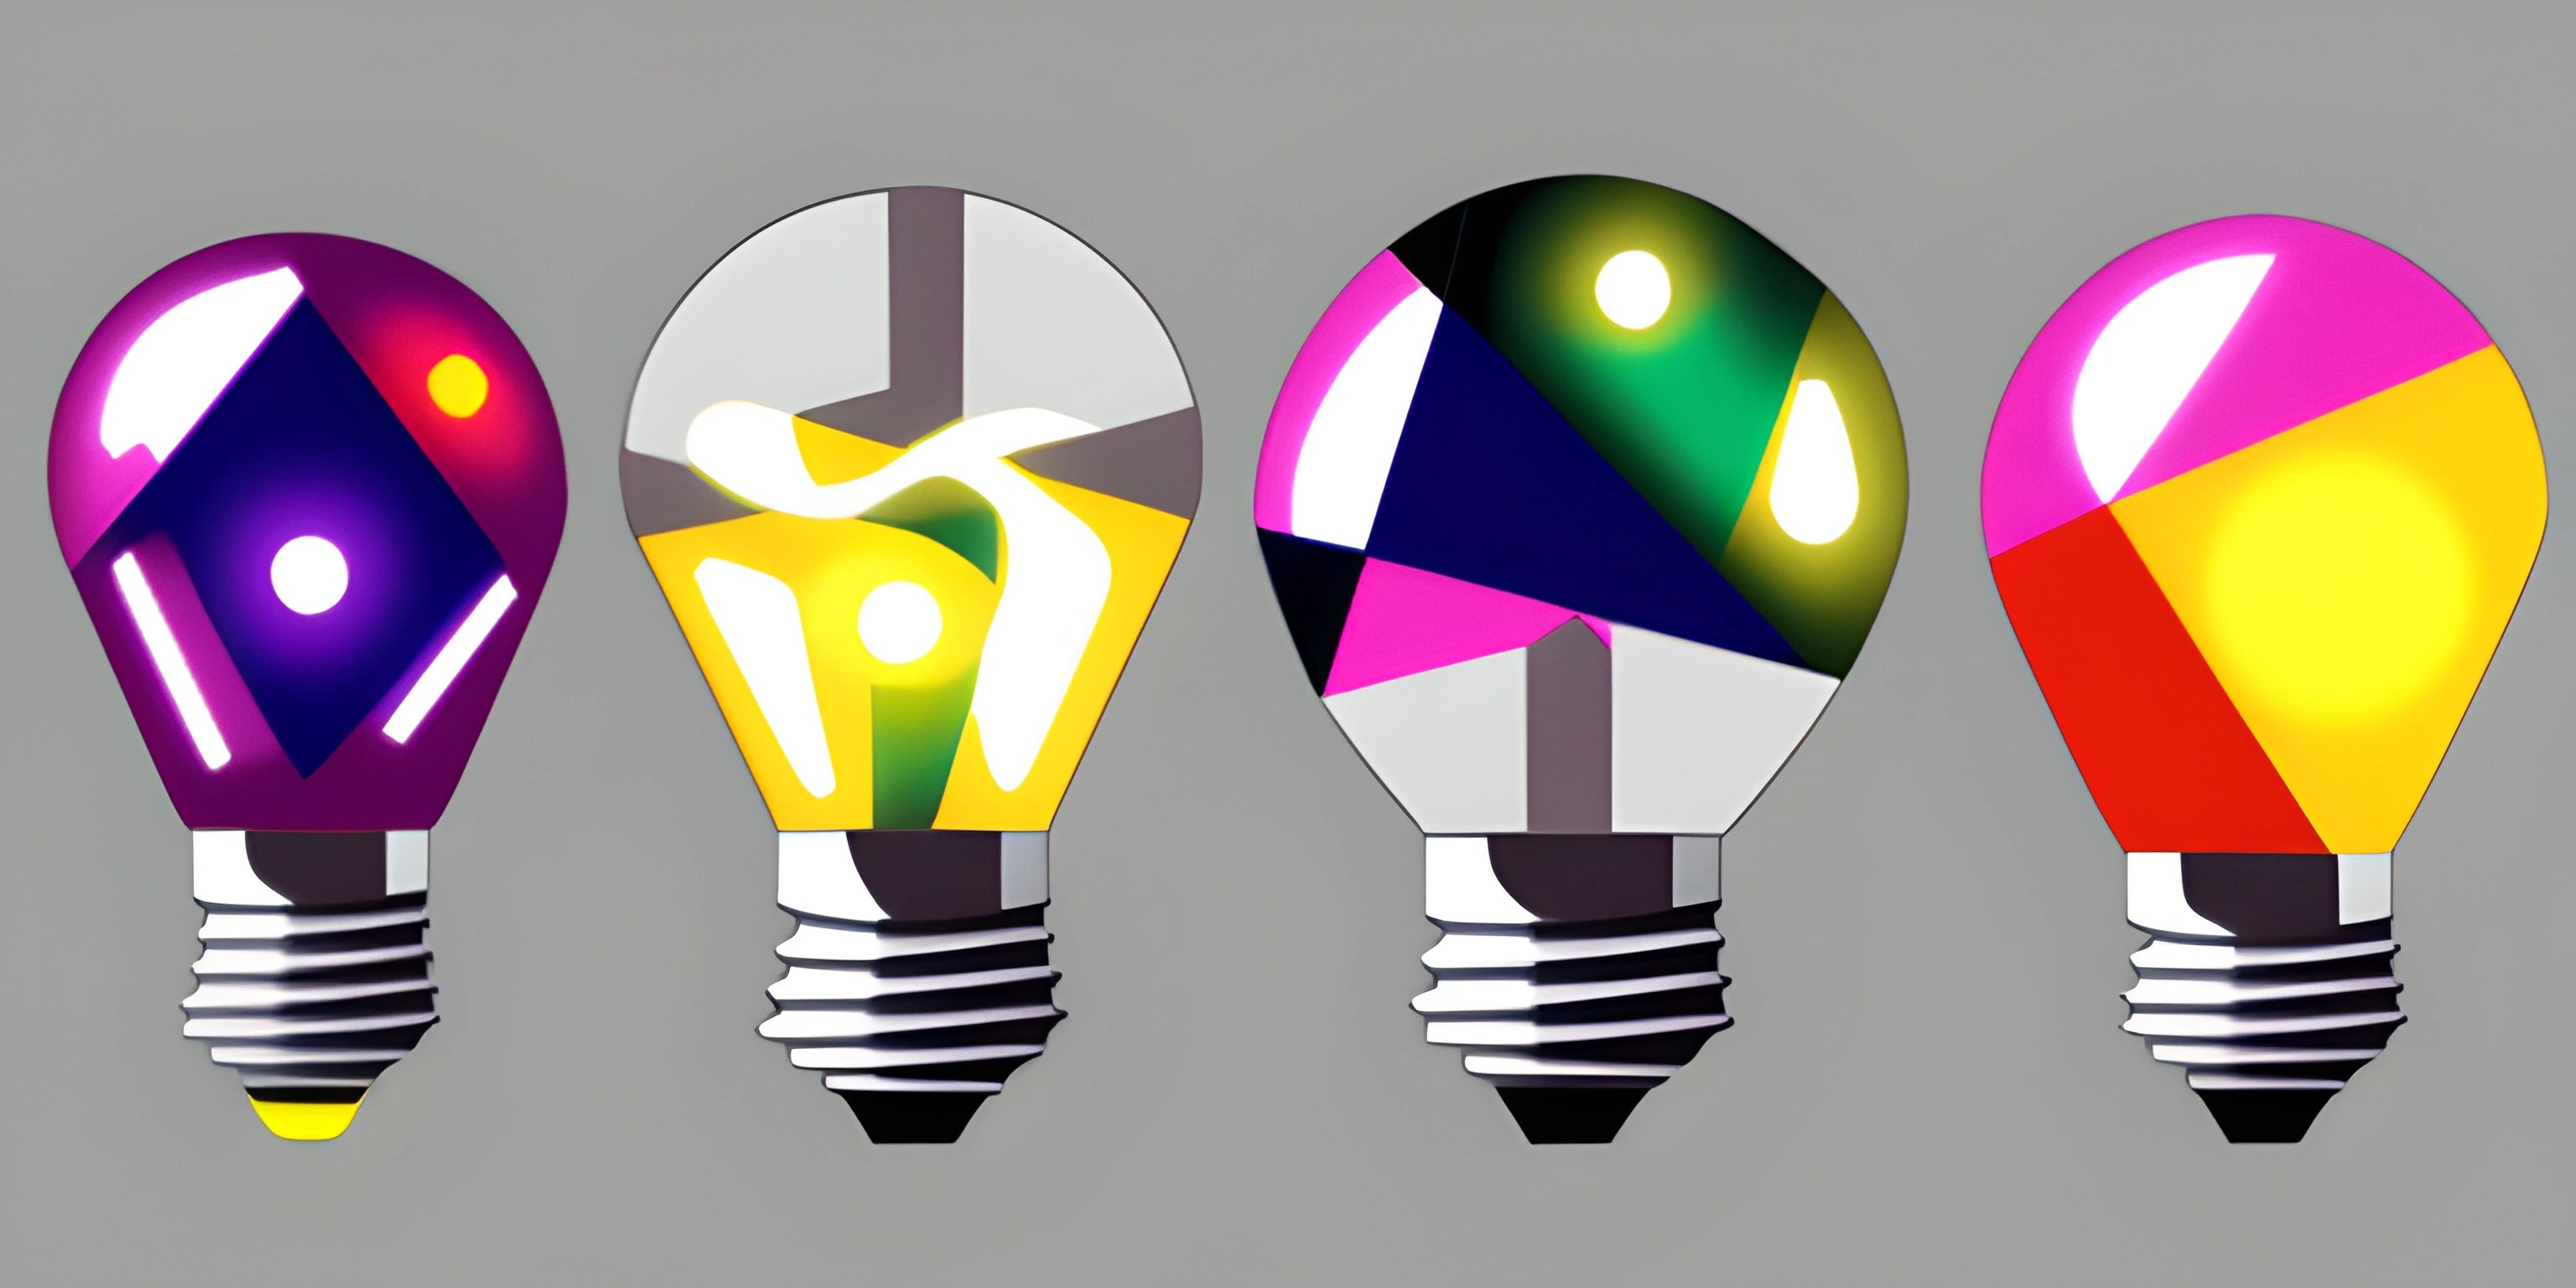 several light bulbs with brightly colored lights on them are arranged as a line of lights